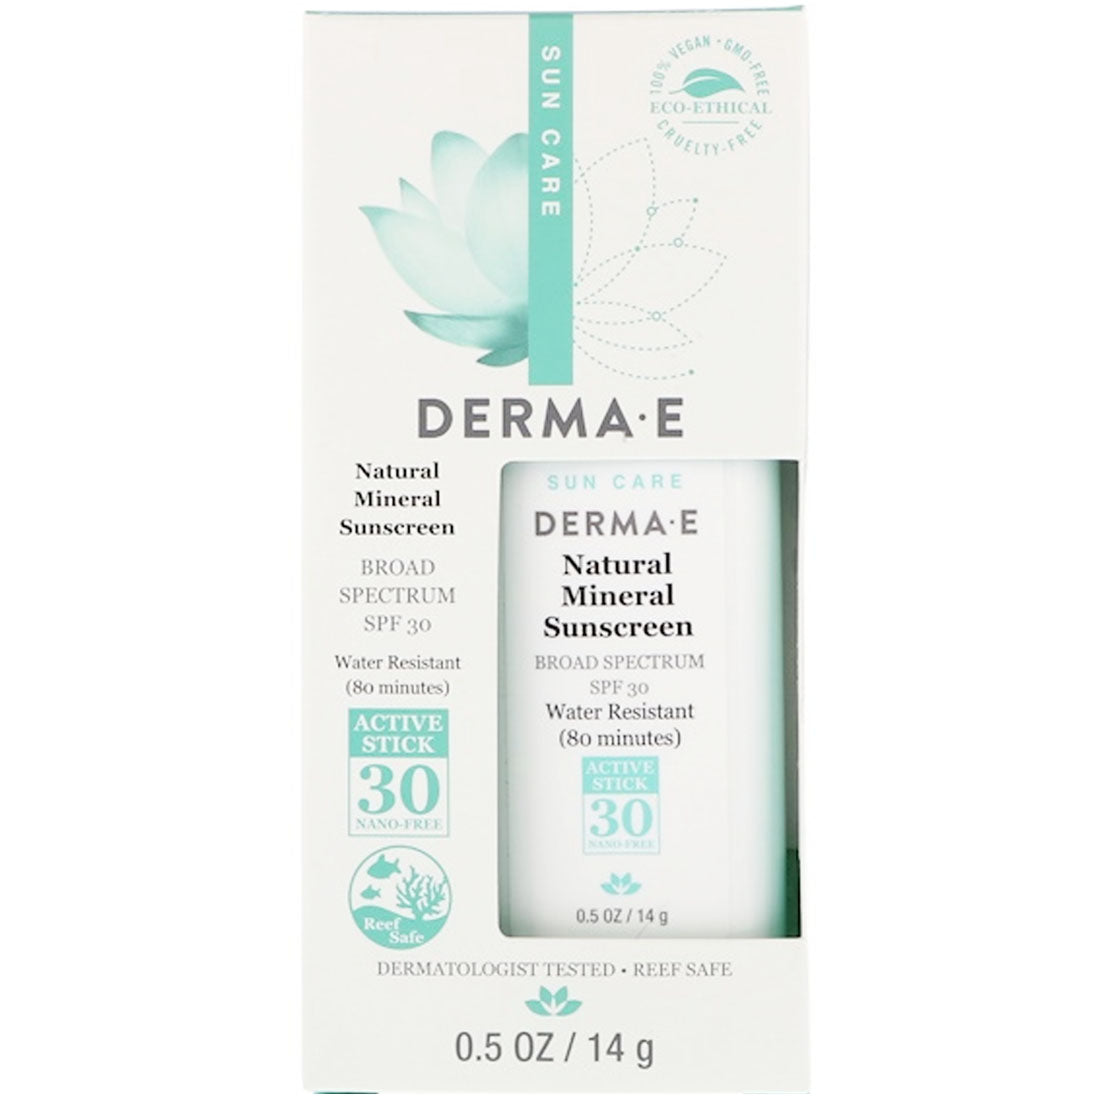 Derma E Natural Mineral Sunscreen SPF30, Water Resistant, 14g